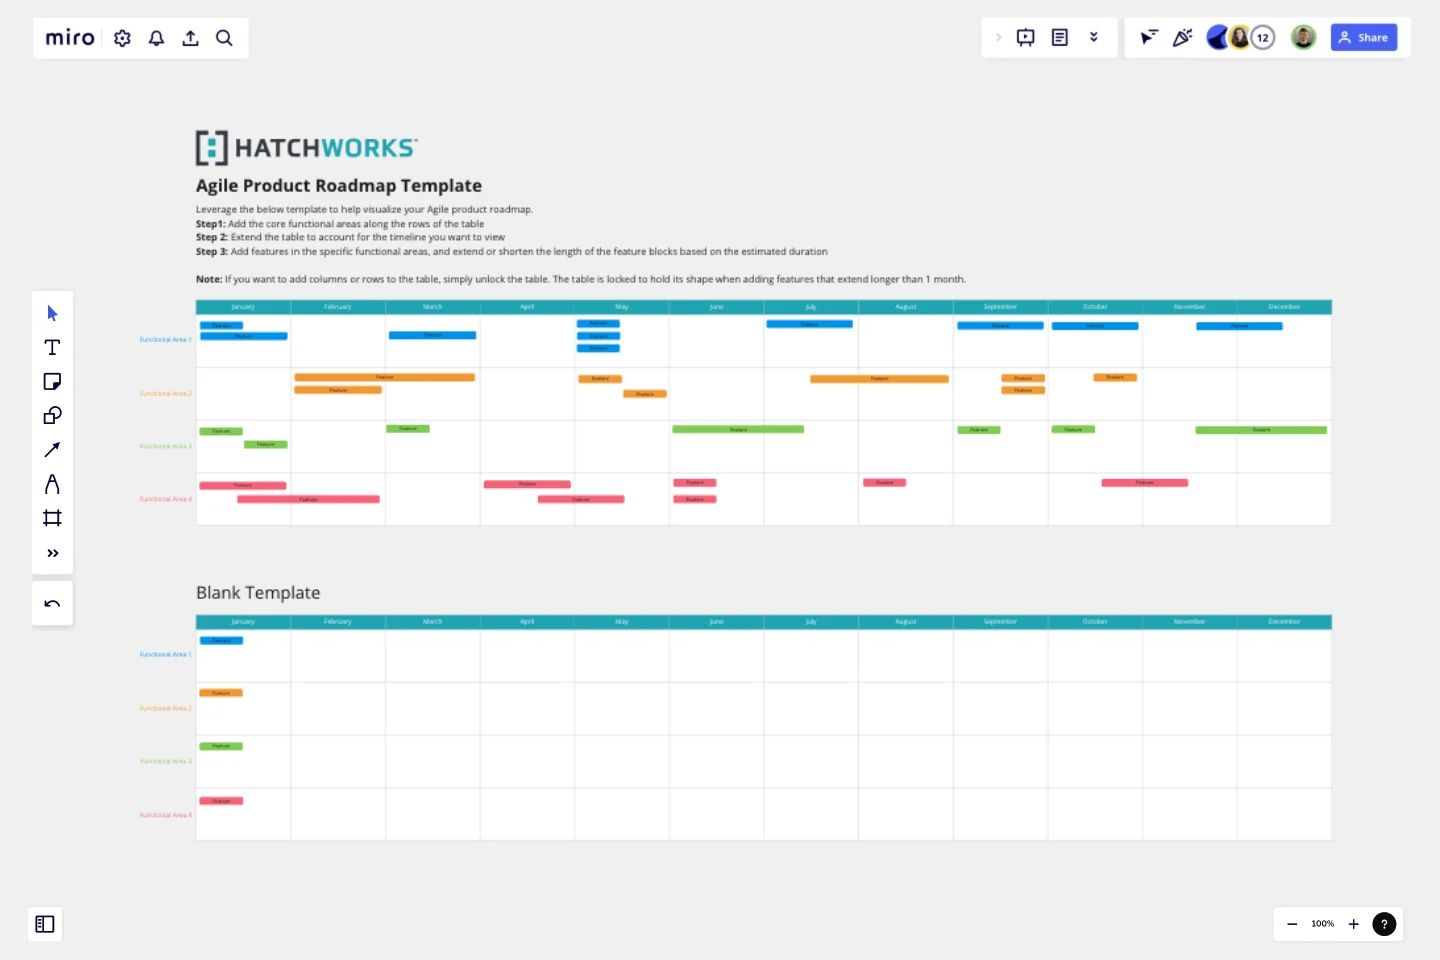 Agile Product Roadmap by HatchWorks template